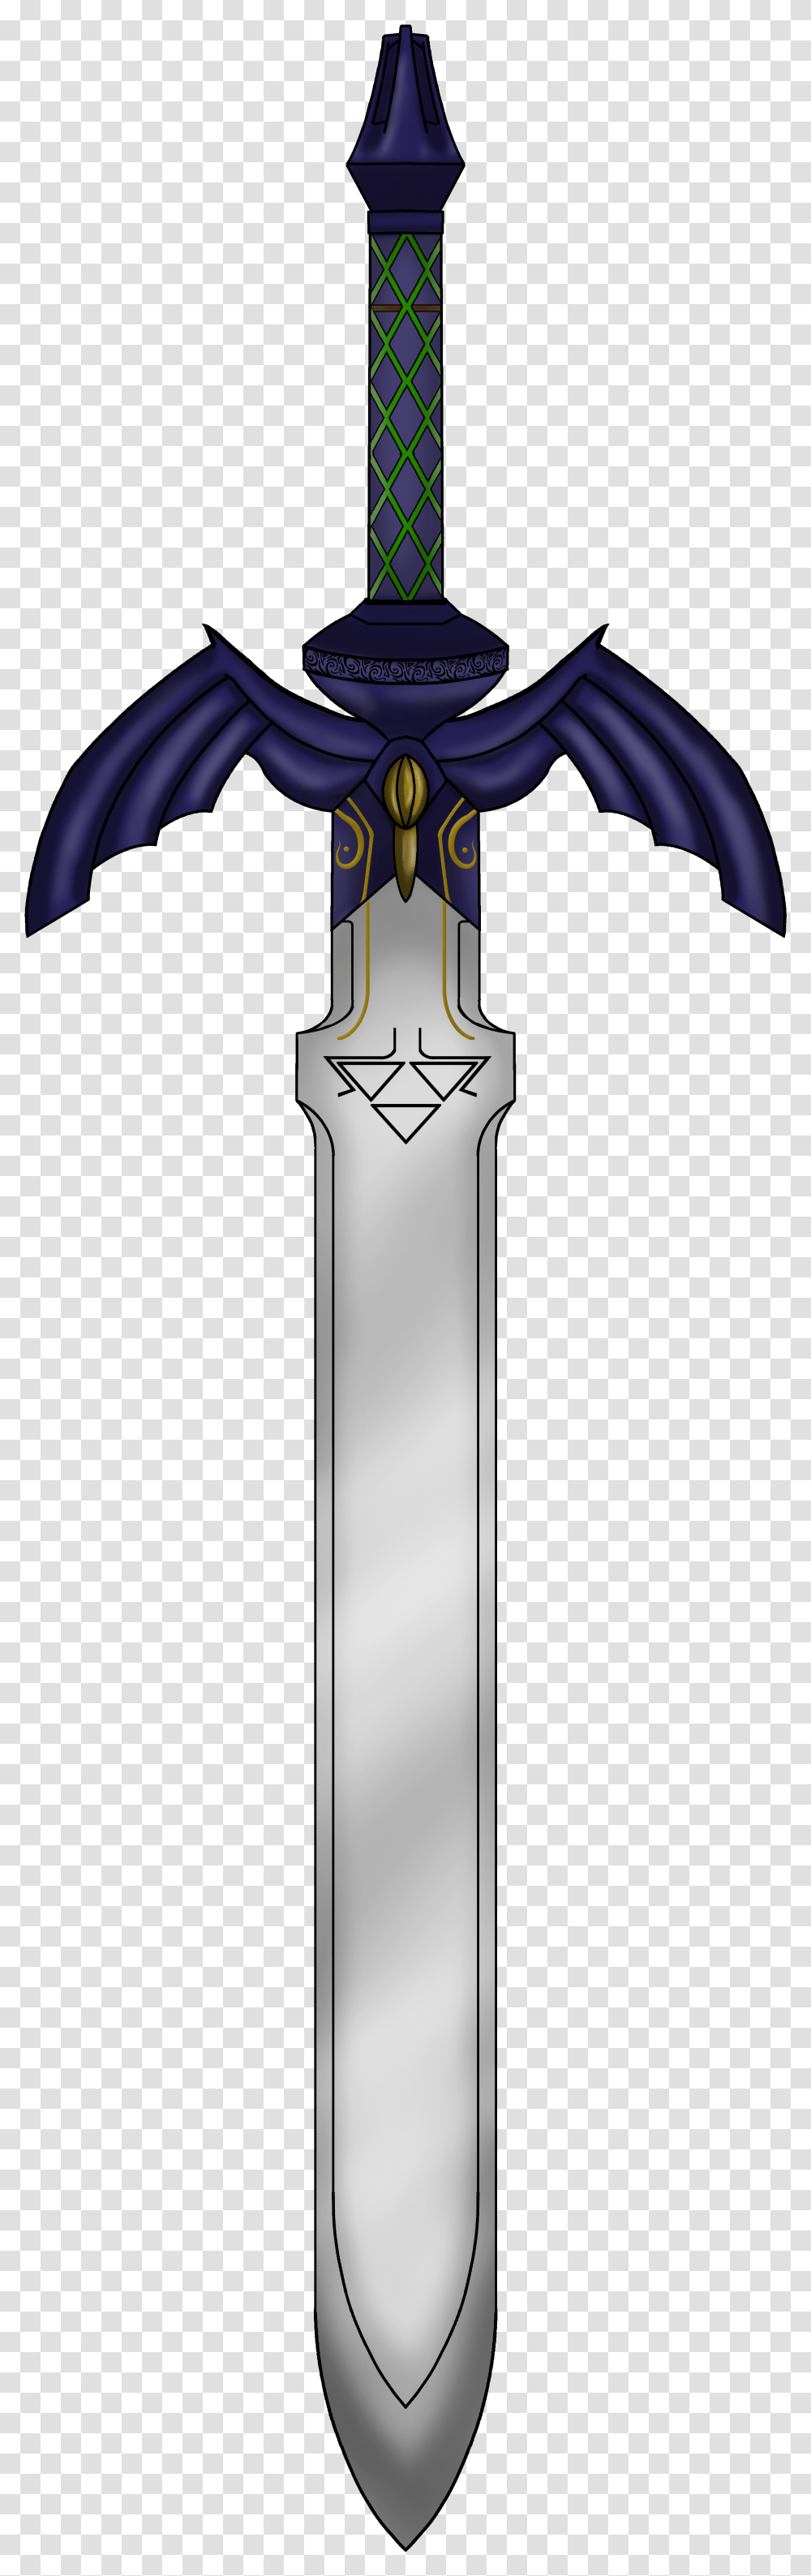 Master Sword Clipart For Your App Zelda Breath Of The Wild The Master Sword, Weapon, Weaponry, Blade, Knife Transparent Png